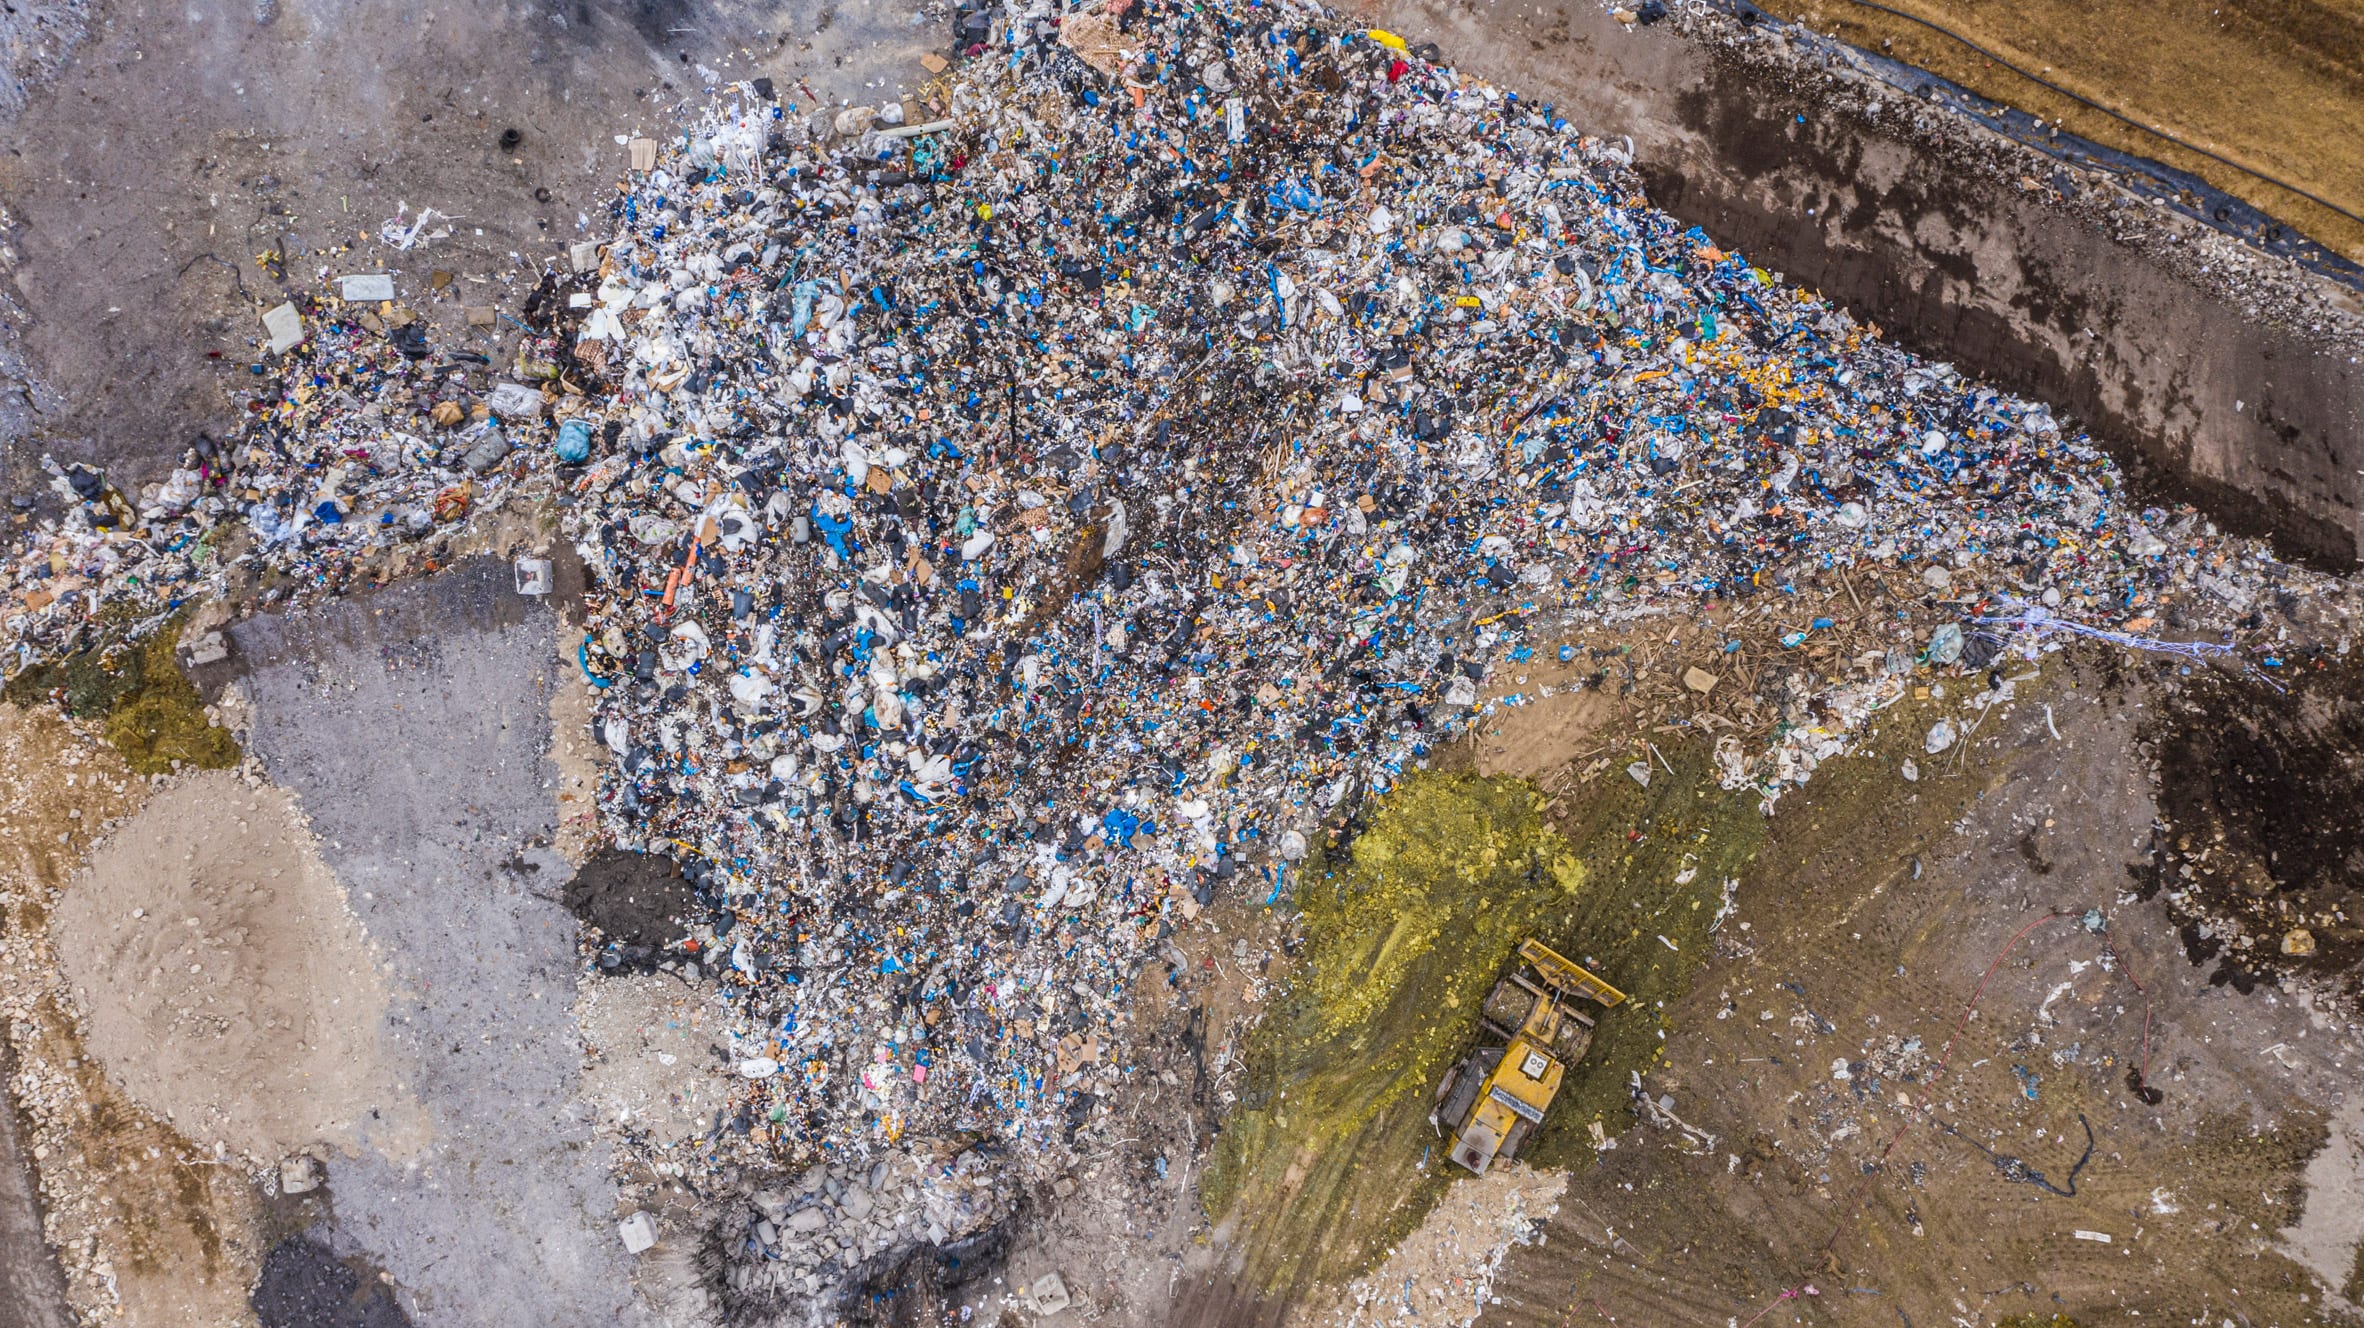 An aerial view of a clothing land fill site